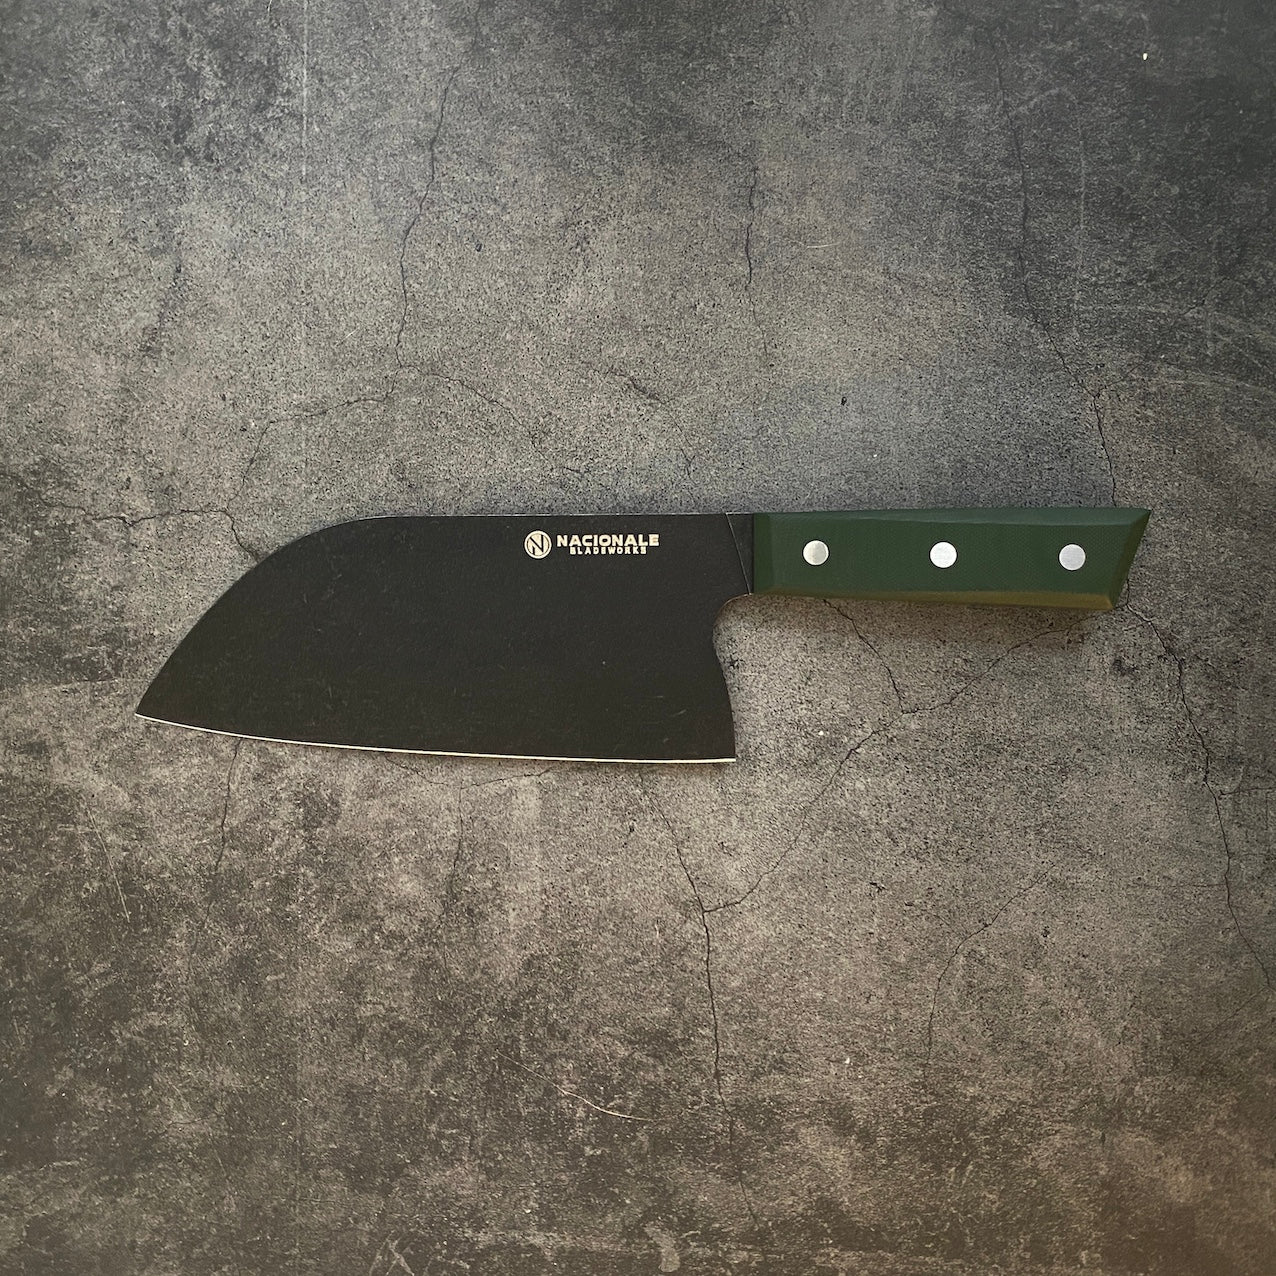 180mm Extra Tall Santoku. AUS8 Stainless. Full Tang Army Green G10 Scales. Ballistic Nylon Case.